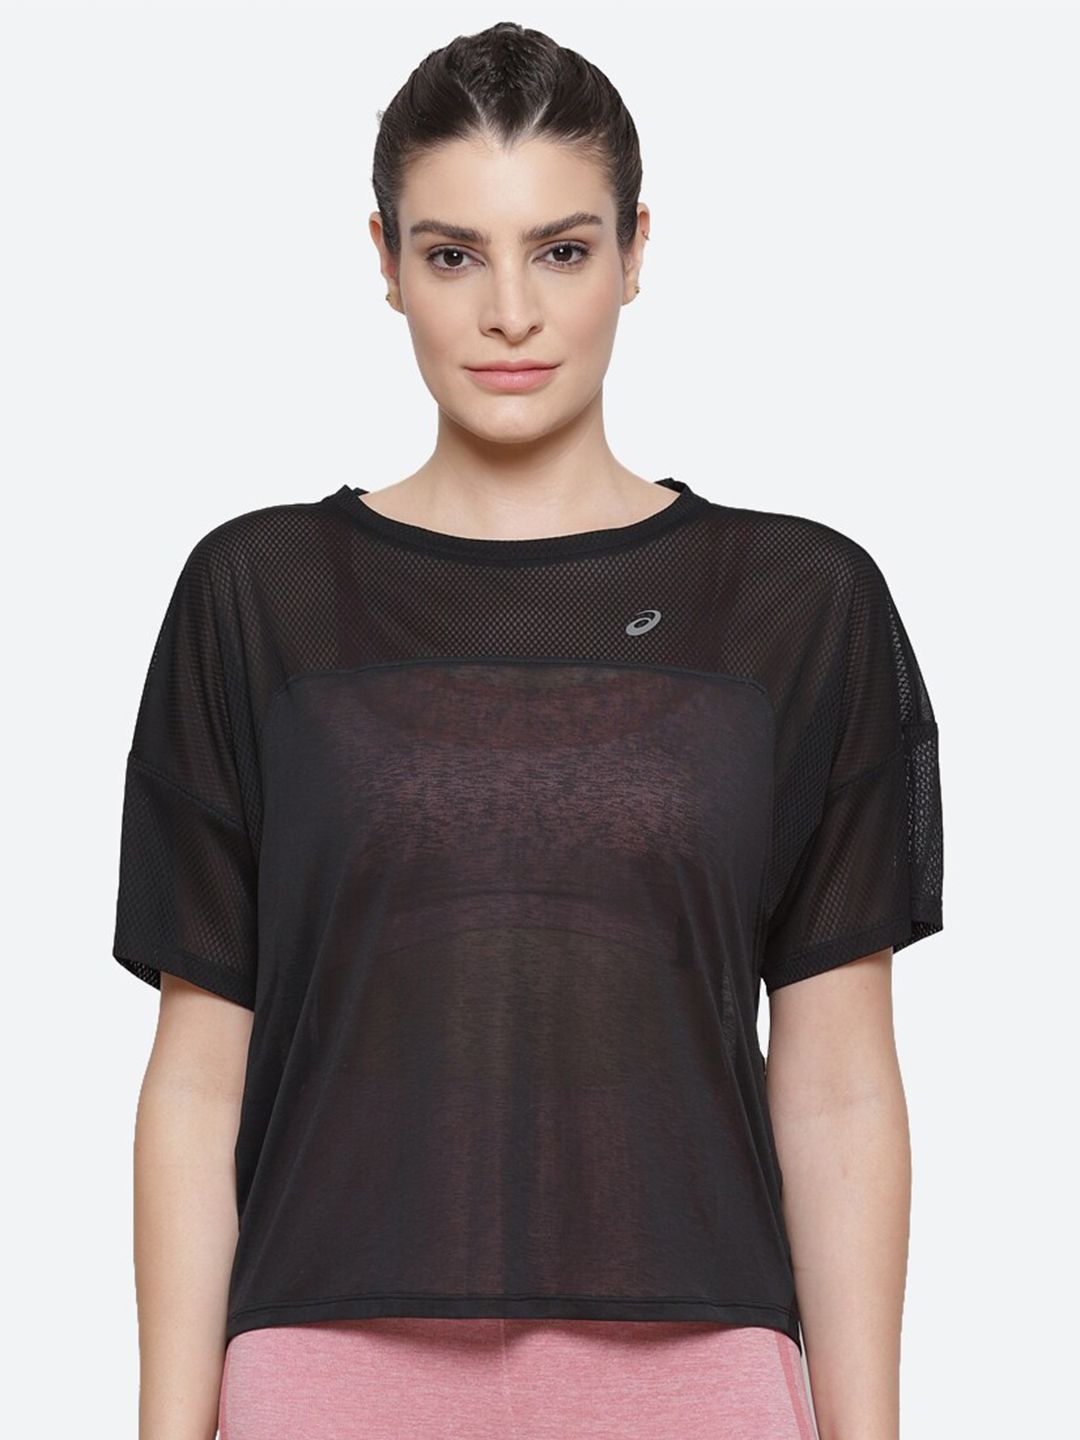 ASICS Women Black Sports Style T-shirt Price in India